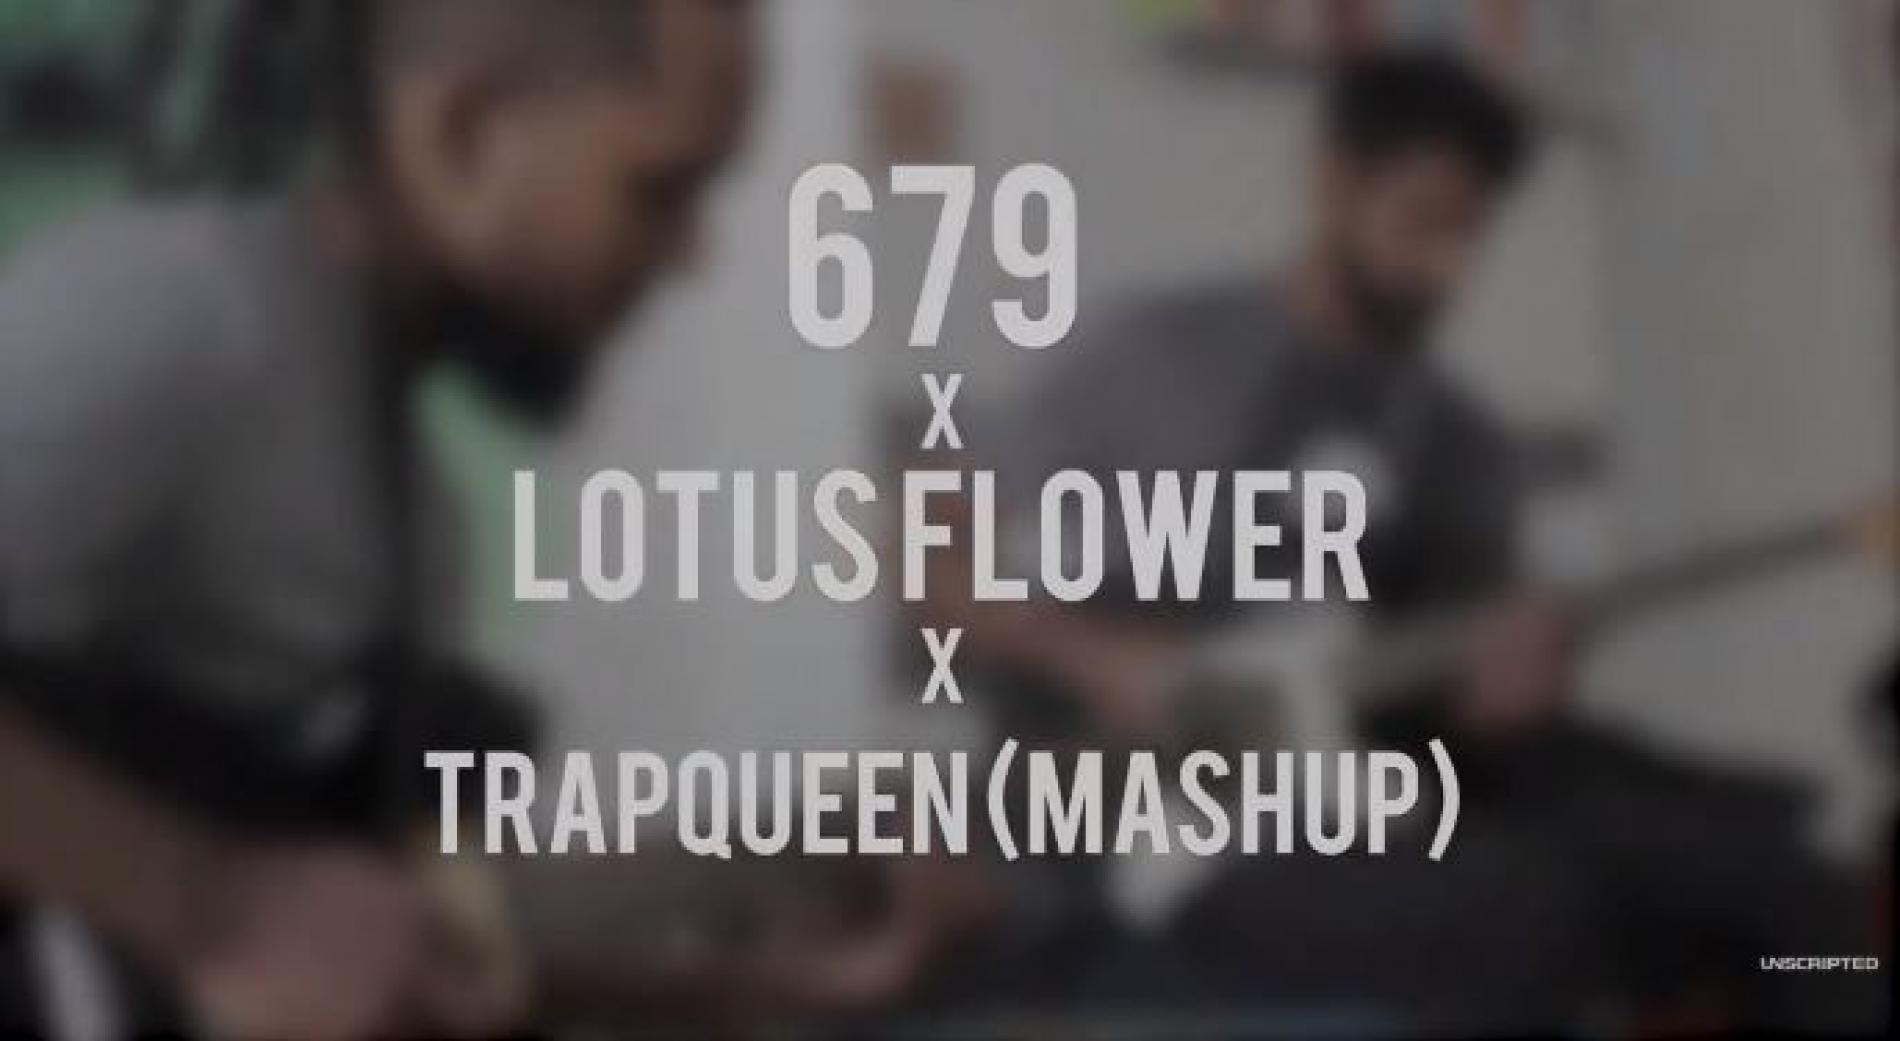 Unscripted – 679 x lotus flower x trapqueen (mashup)